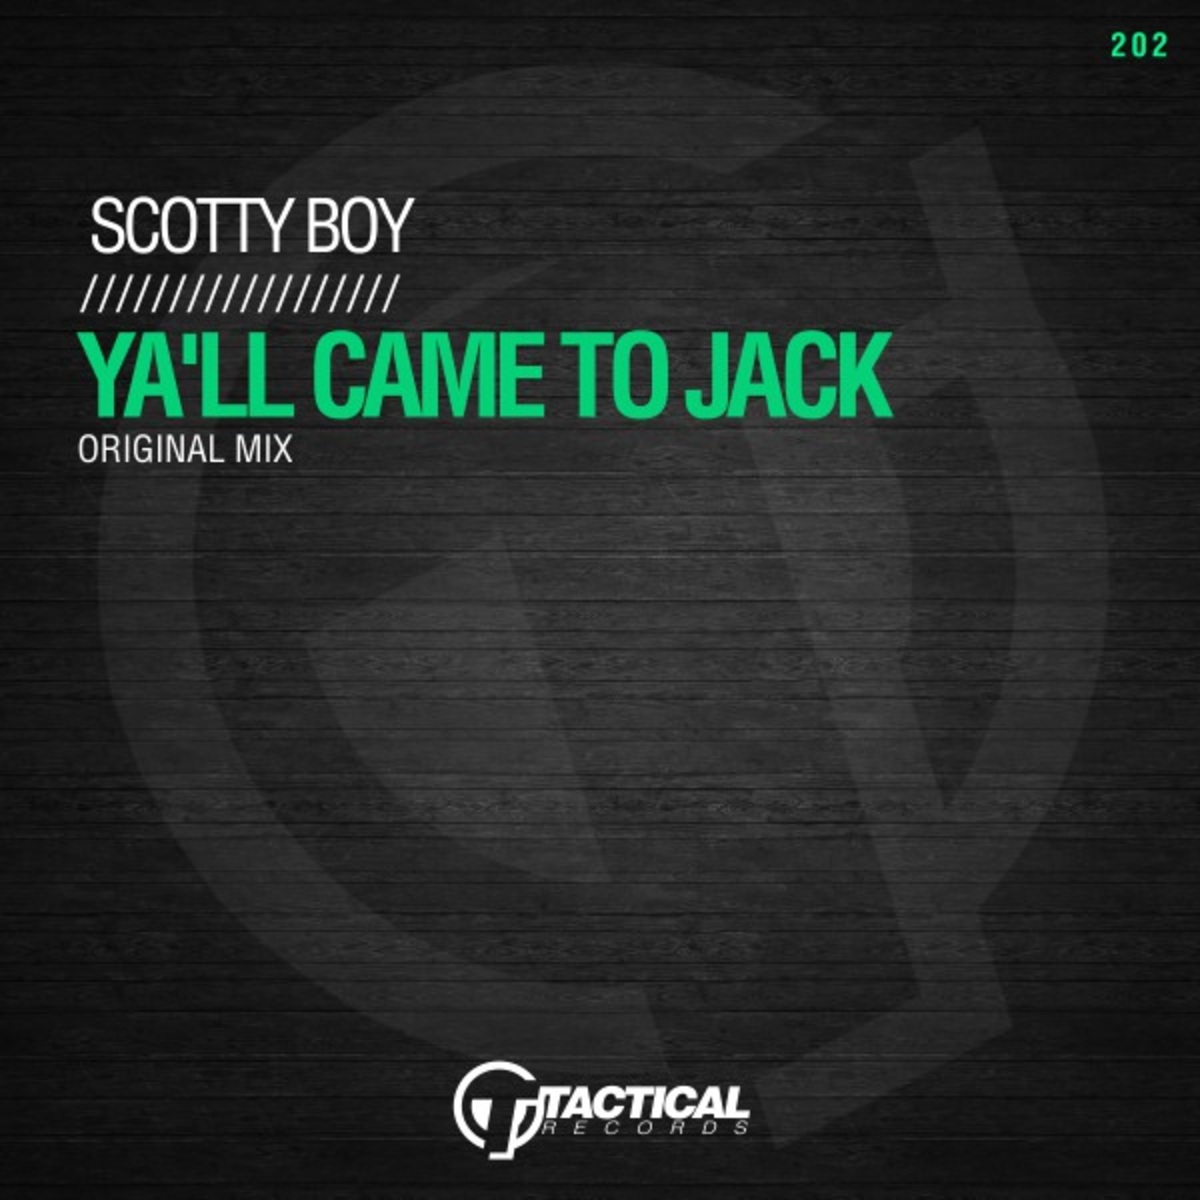 Scotty Boy - Ya'll Came to Jack? / Tactical Records